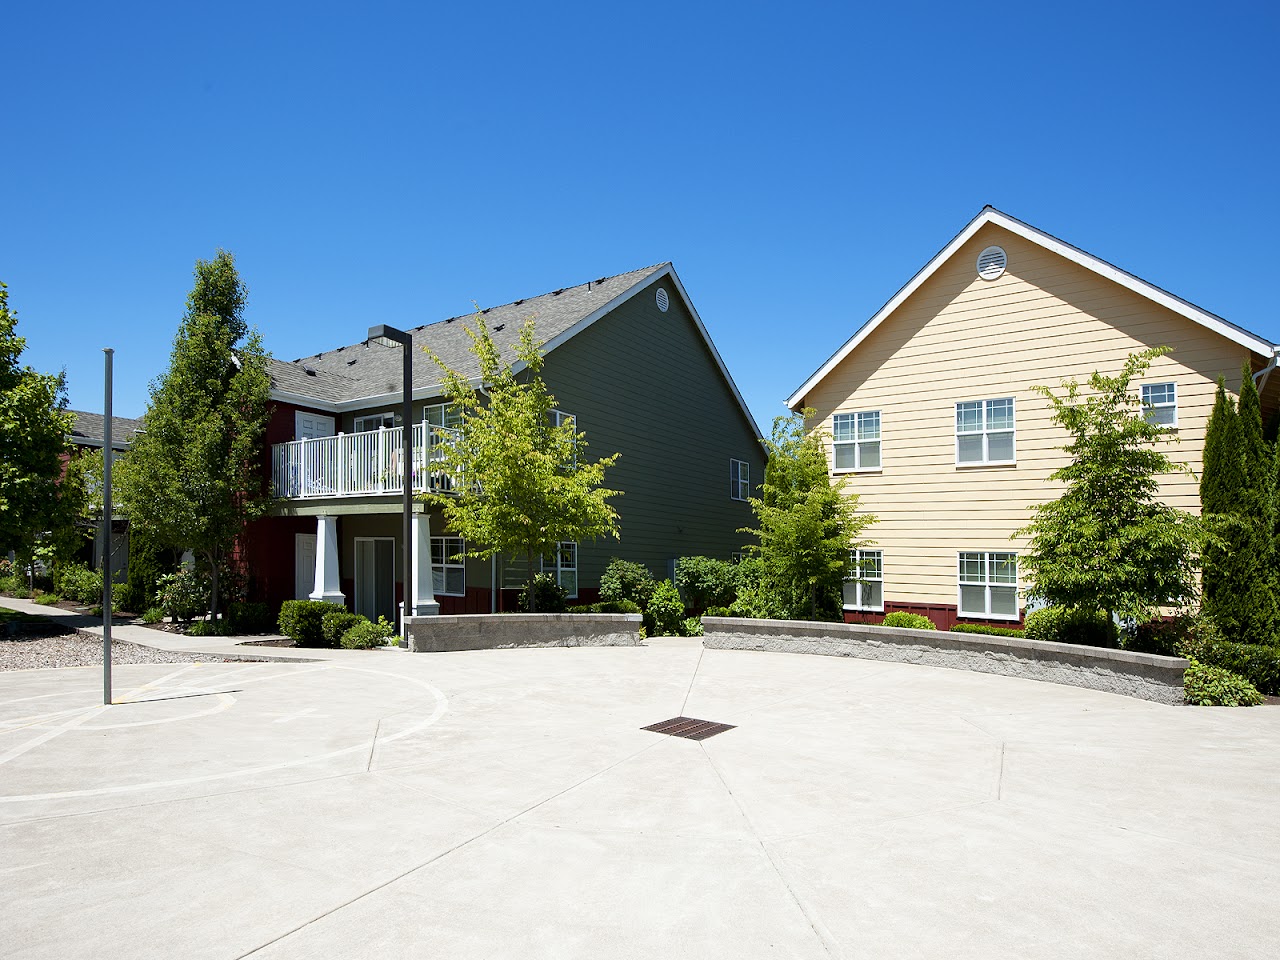 Photo of APPLE ORCHARD VILLAGE. Affordable housing located at 2694 EDGEWOOD DR EUGENE, OR 97404